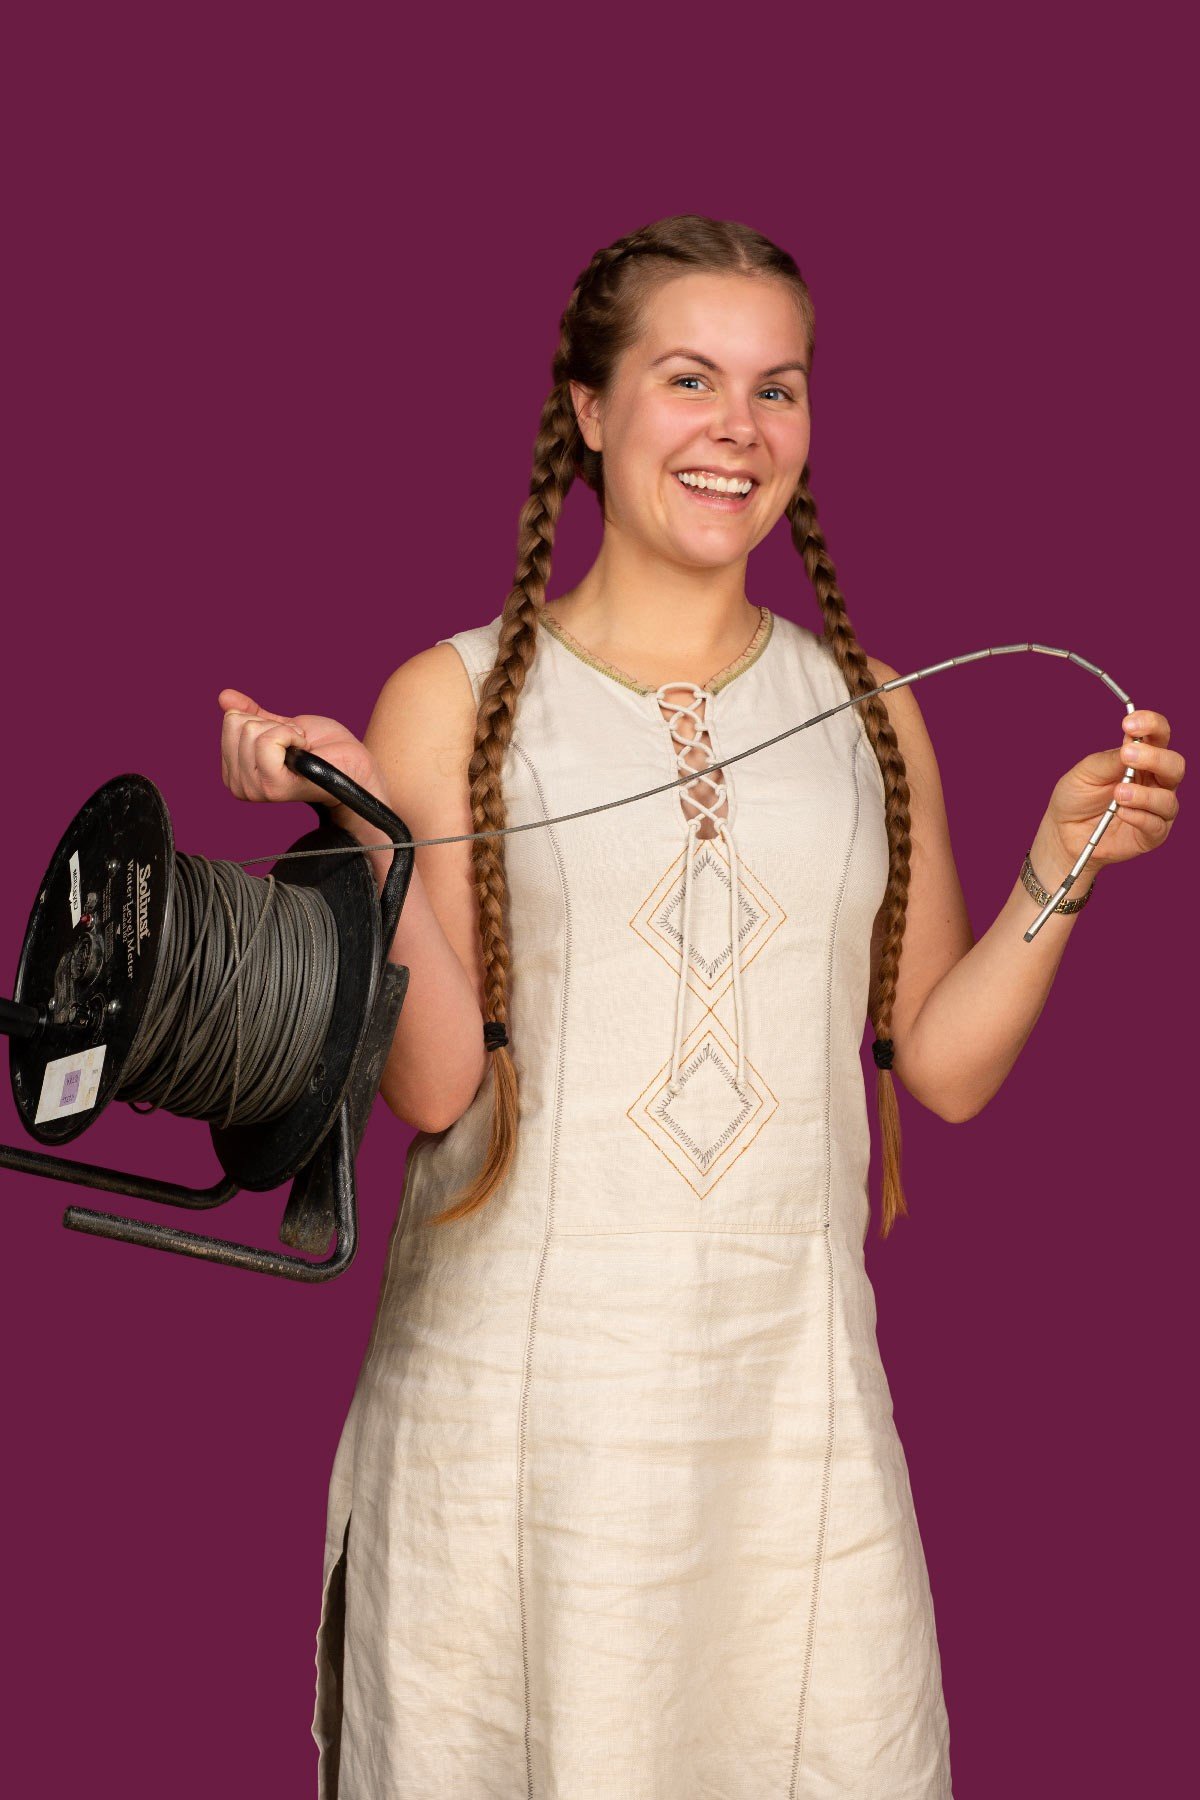 Emely in a dress holding a cable reel